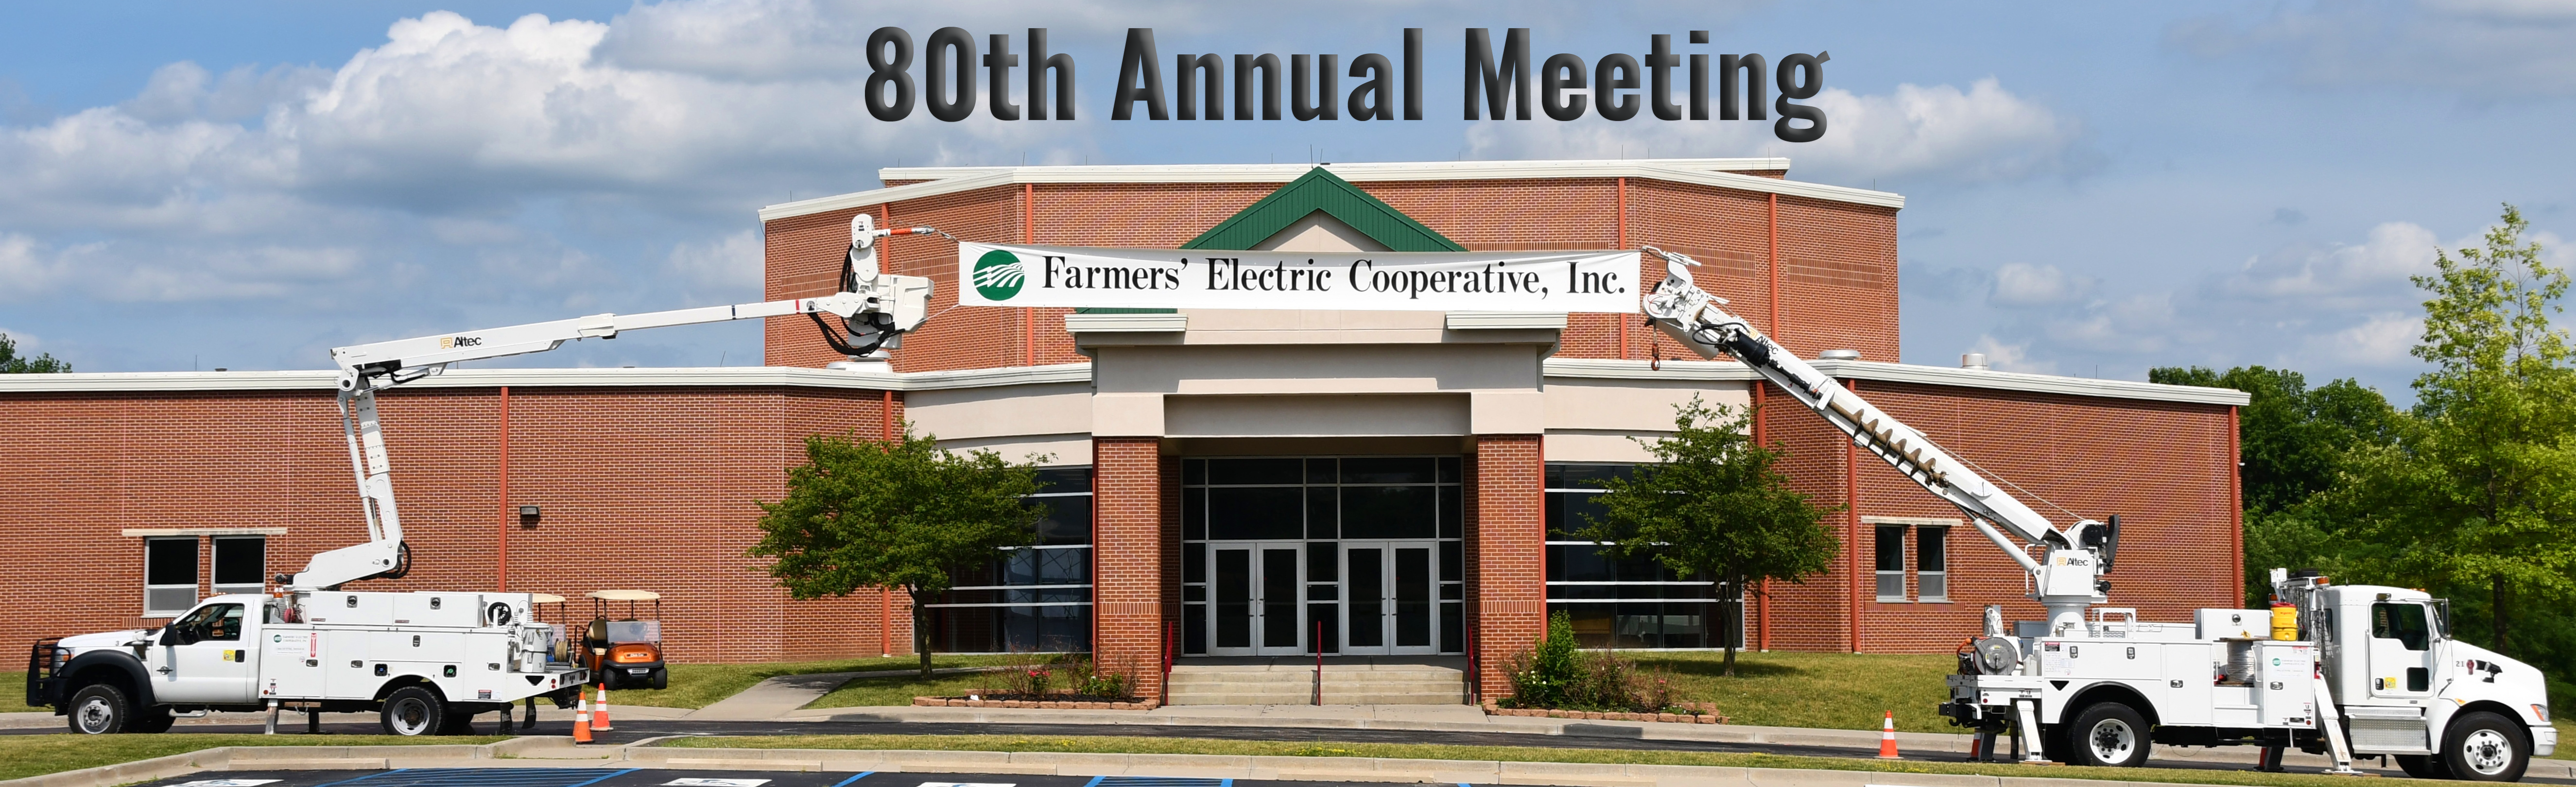 annual-meeting-farmers-electric-cooperative